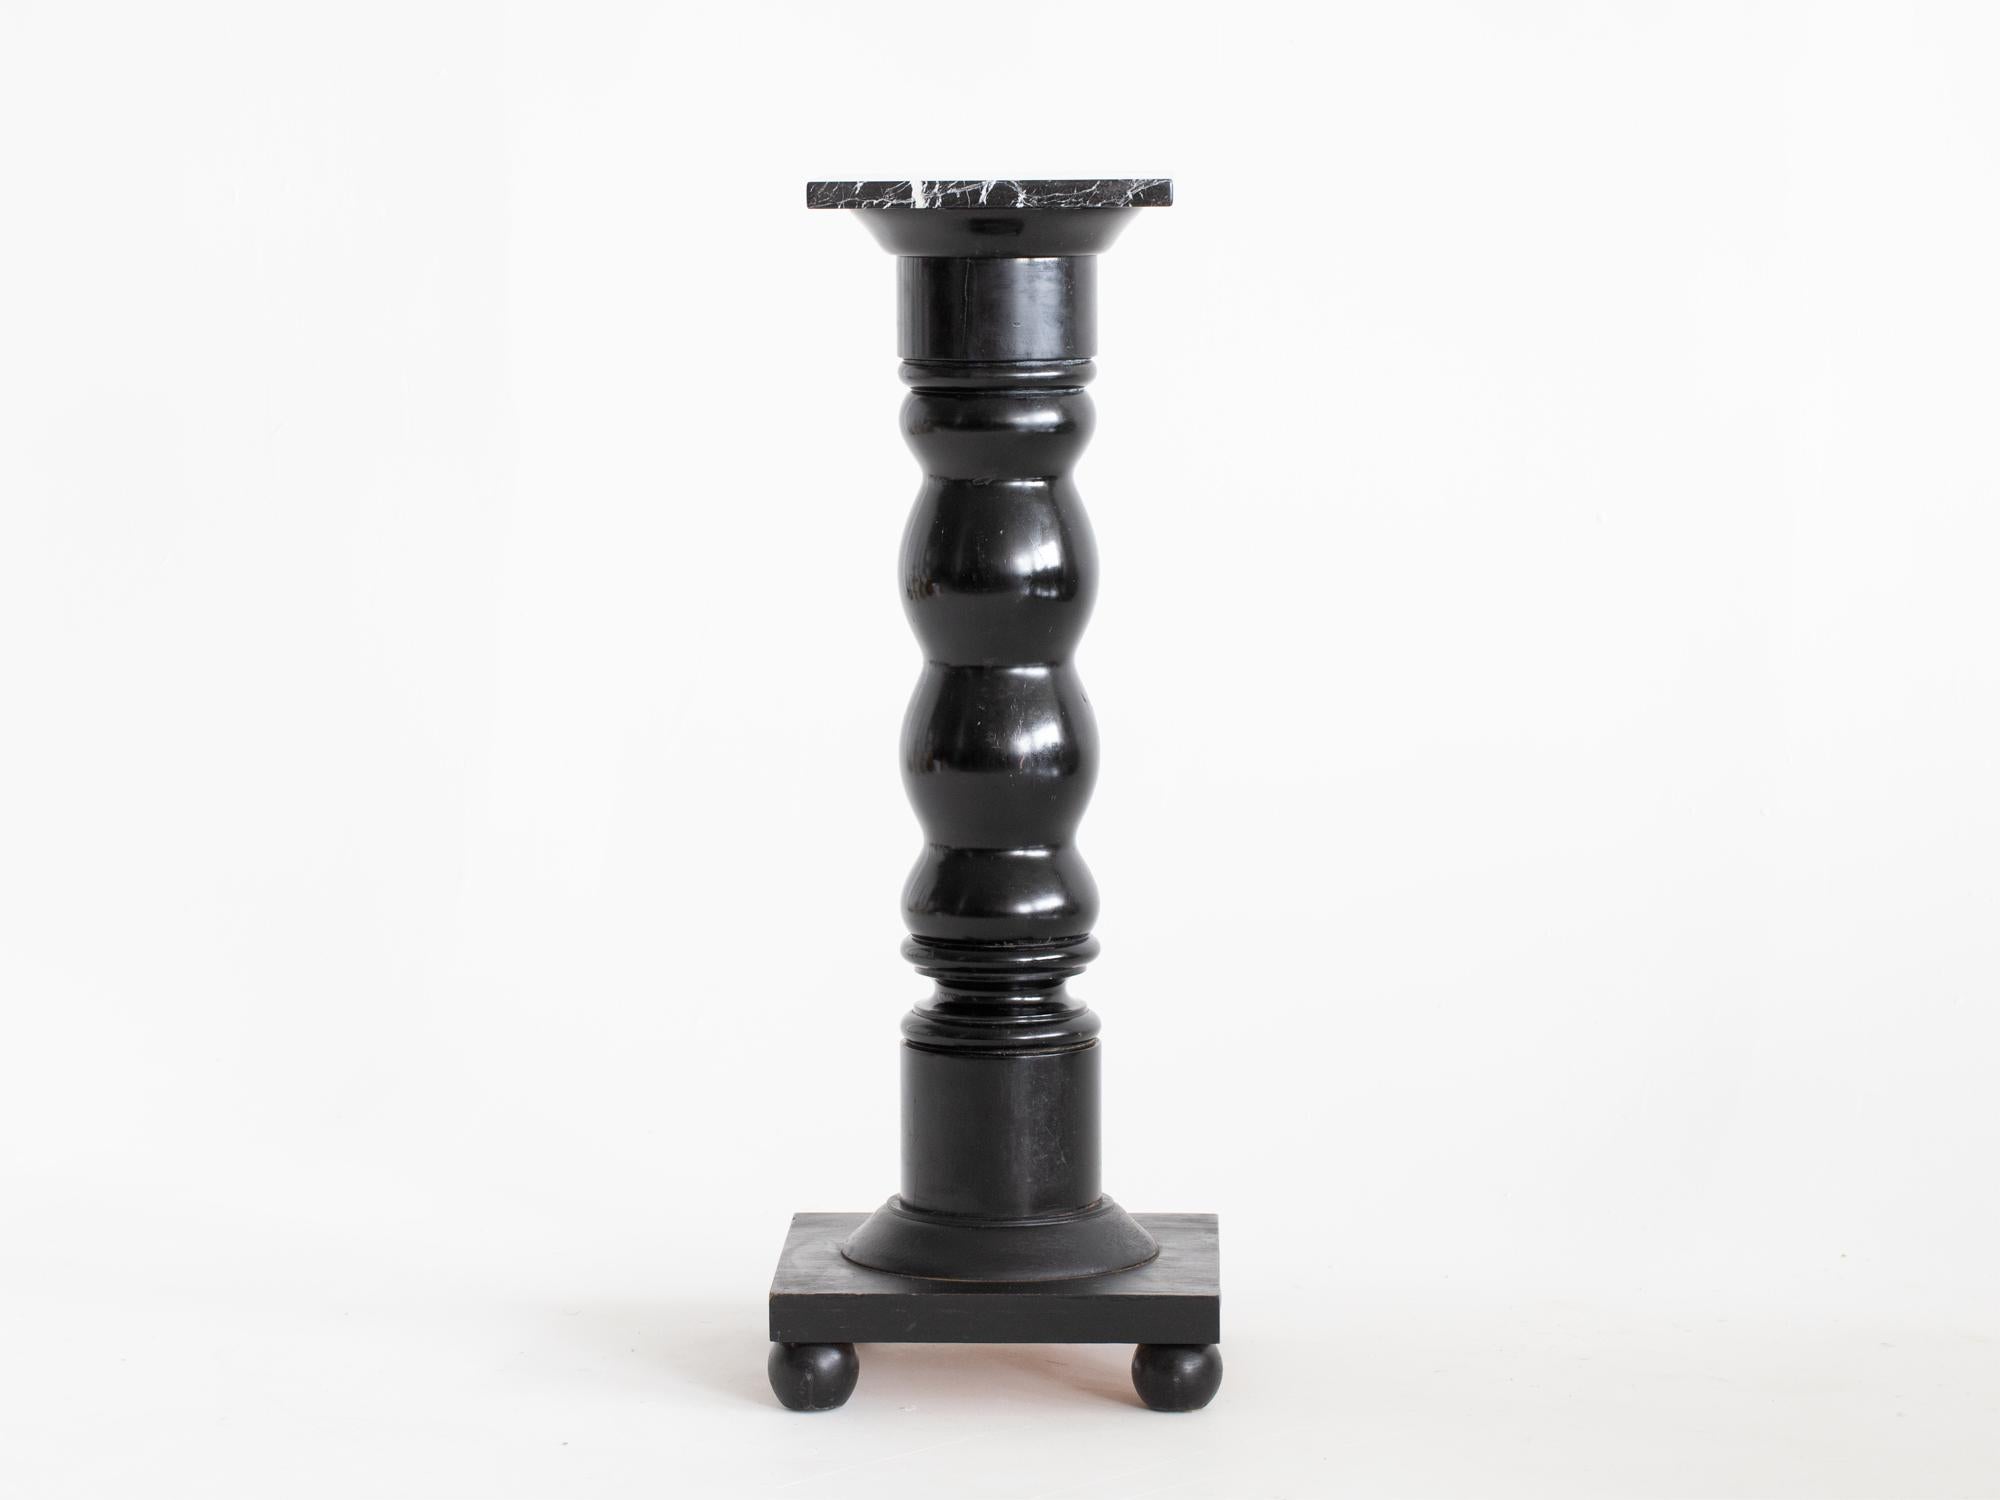 A bobbin-turned ebonised column or pedestal with black veined marble top, raised on bun feet. Swedish, c. 1920s.

In good sturdy order with light cosmetic wear.

91 x 34 x 34 cm (35.8 x 13.4 x 13.4 